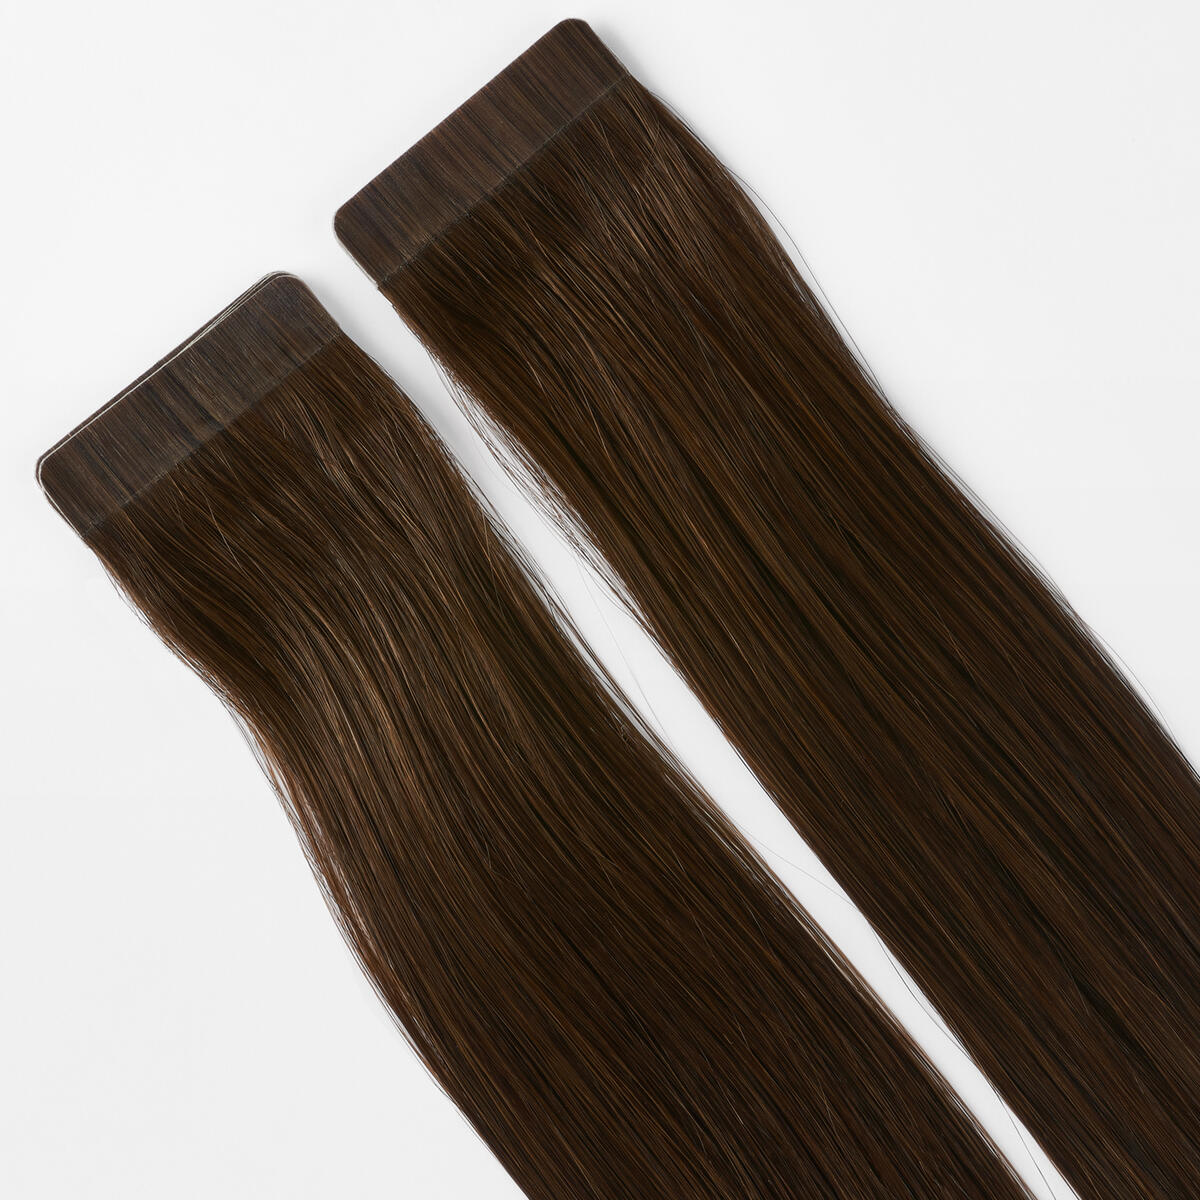 Basic Tape Extensions Classic 4 2.2 Coffee Brown 30 cm